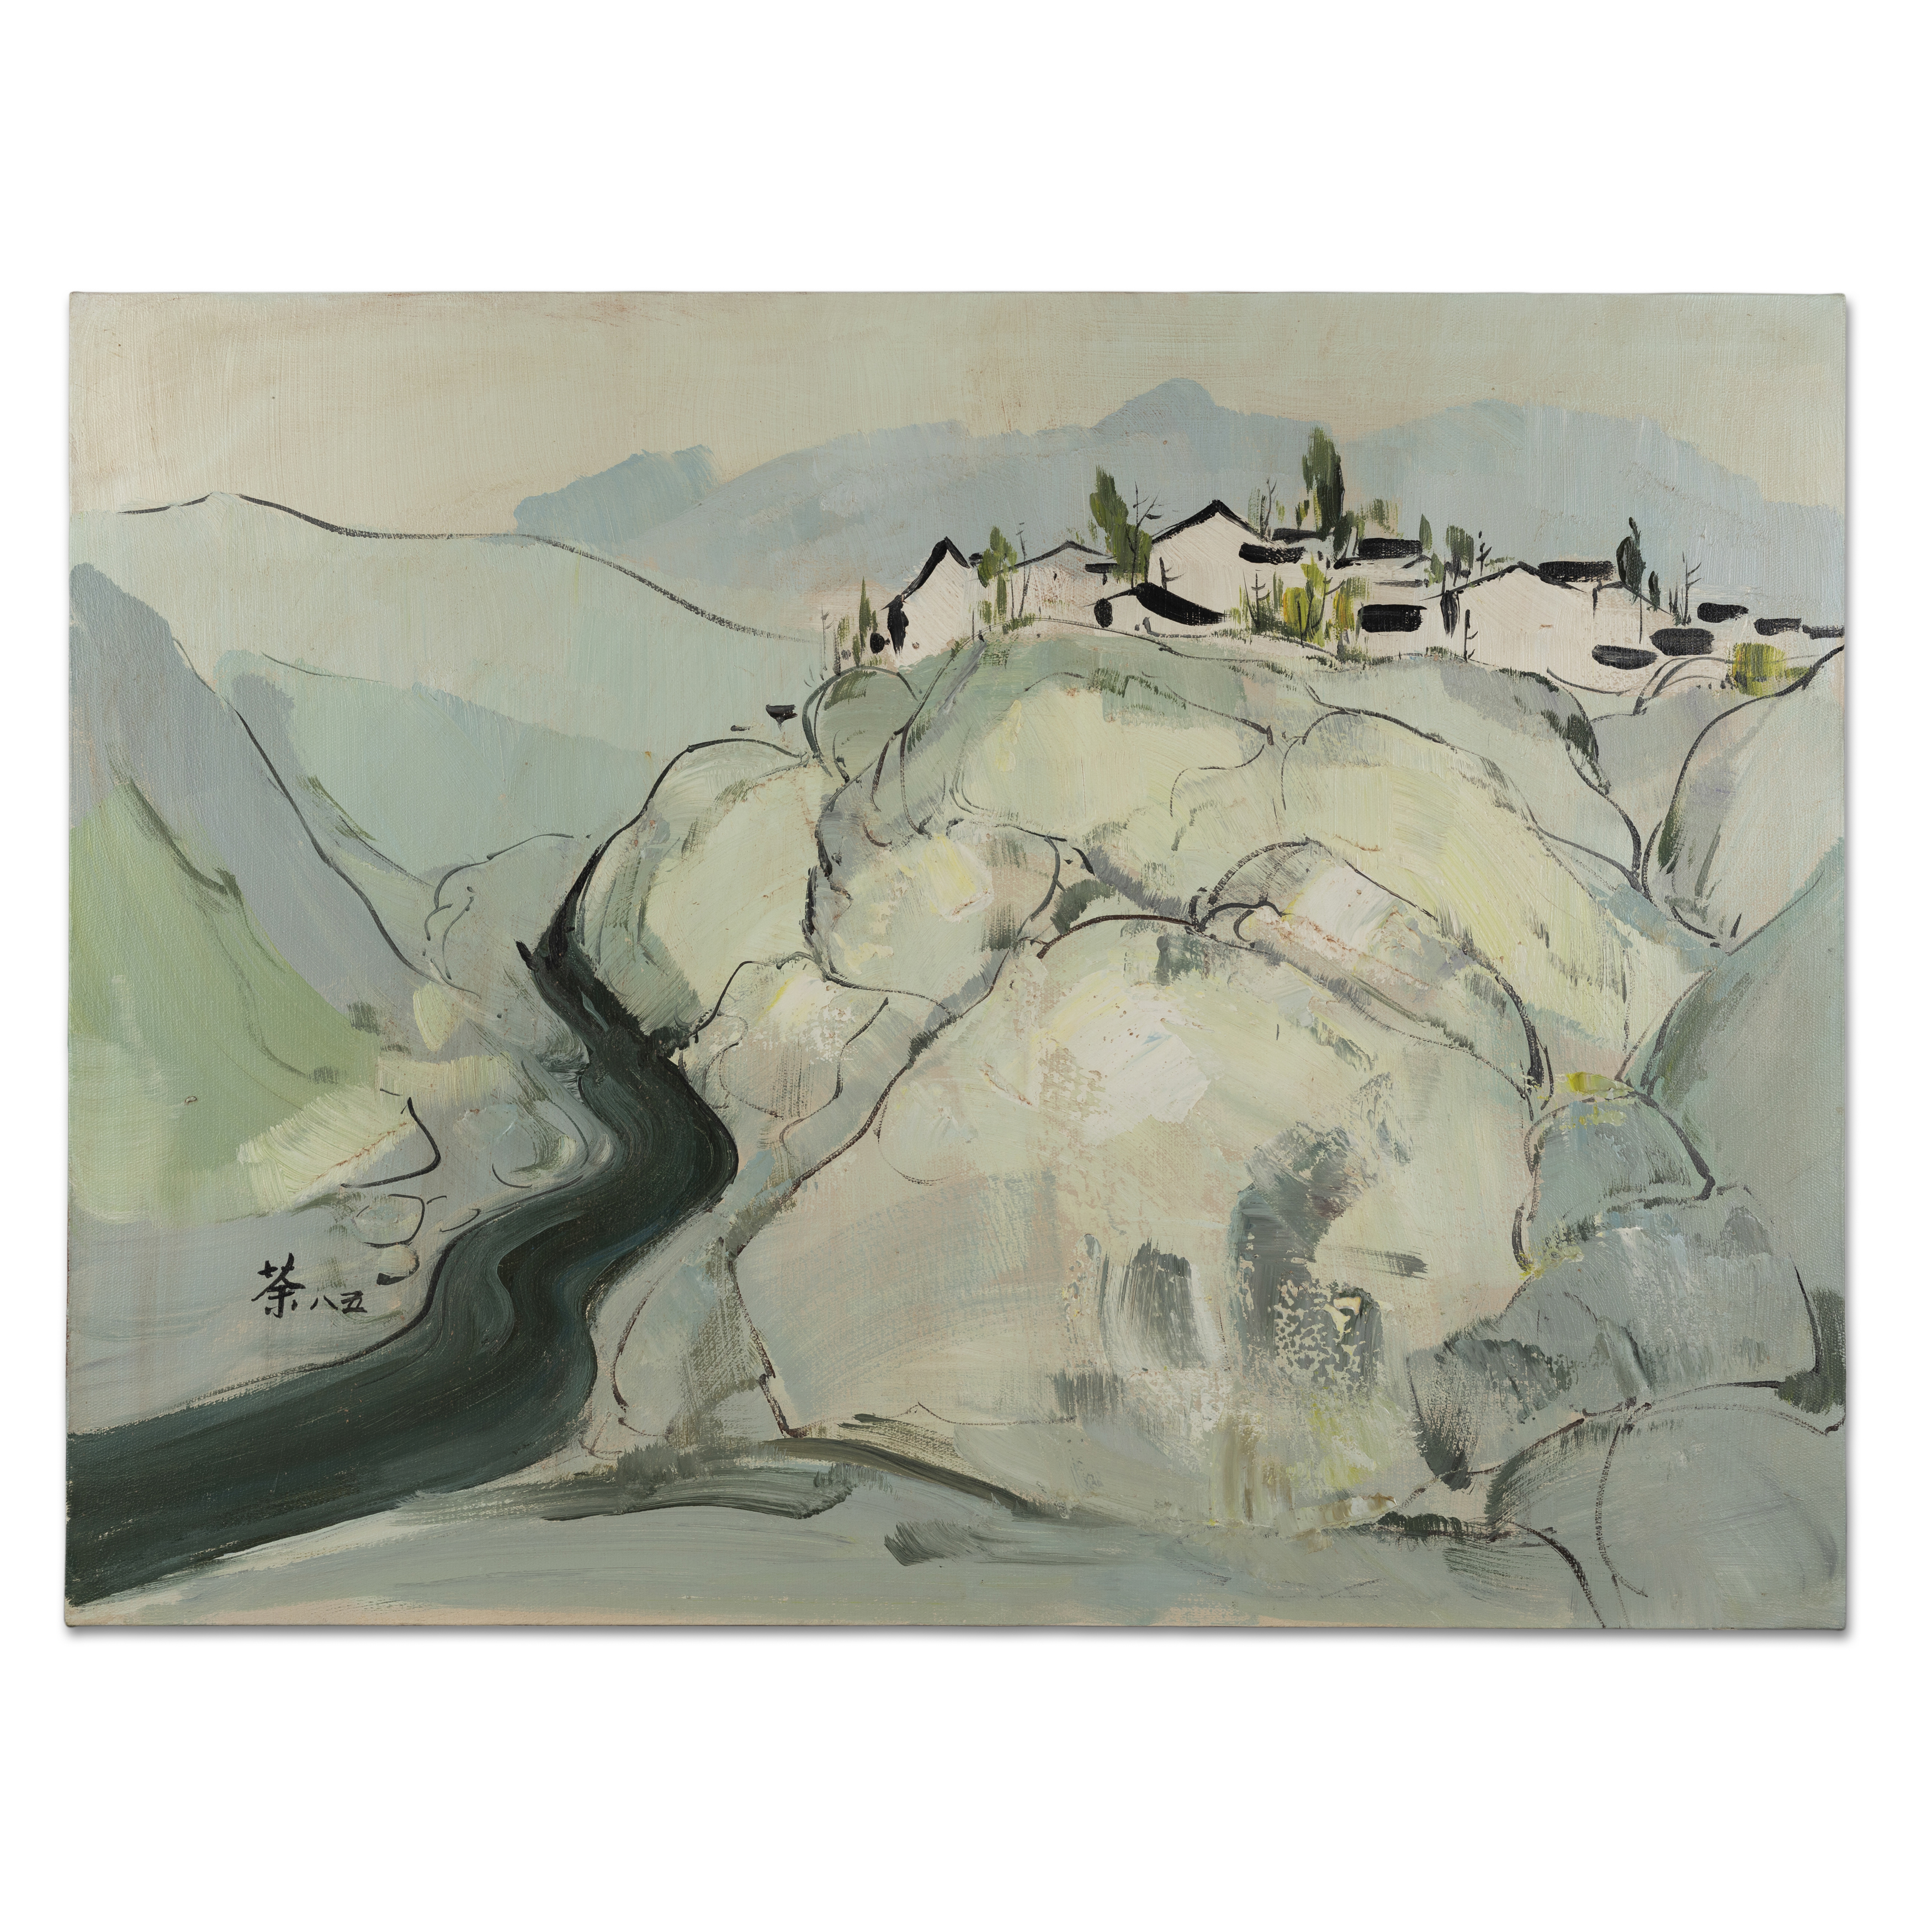 Follower of Wu Guanzhong (1919 - 2010) 'Landscape' Oil on canvas signed Tu and 85 in Chinese (...